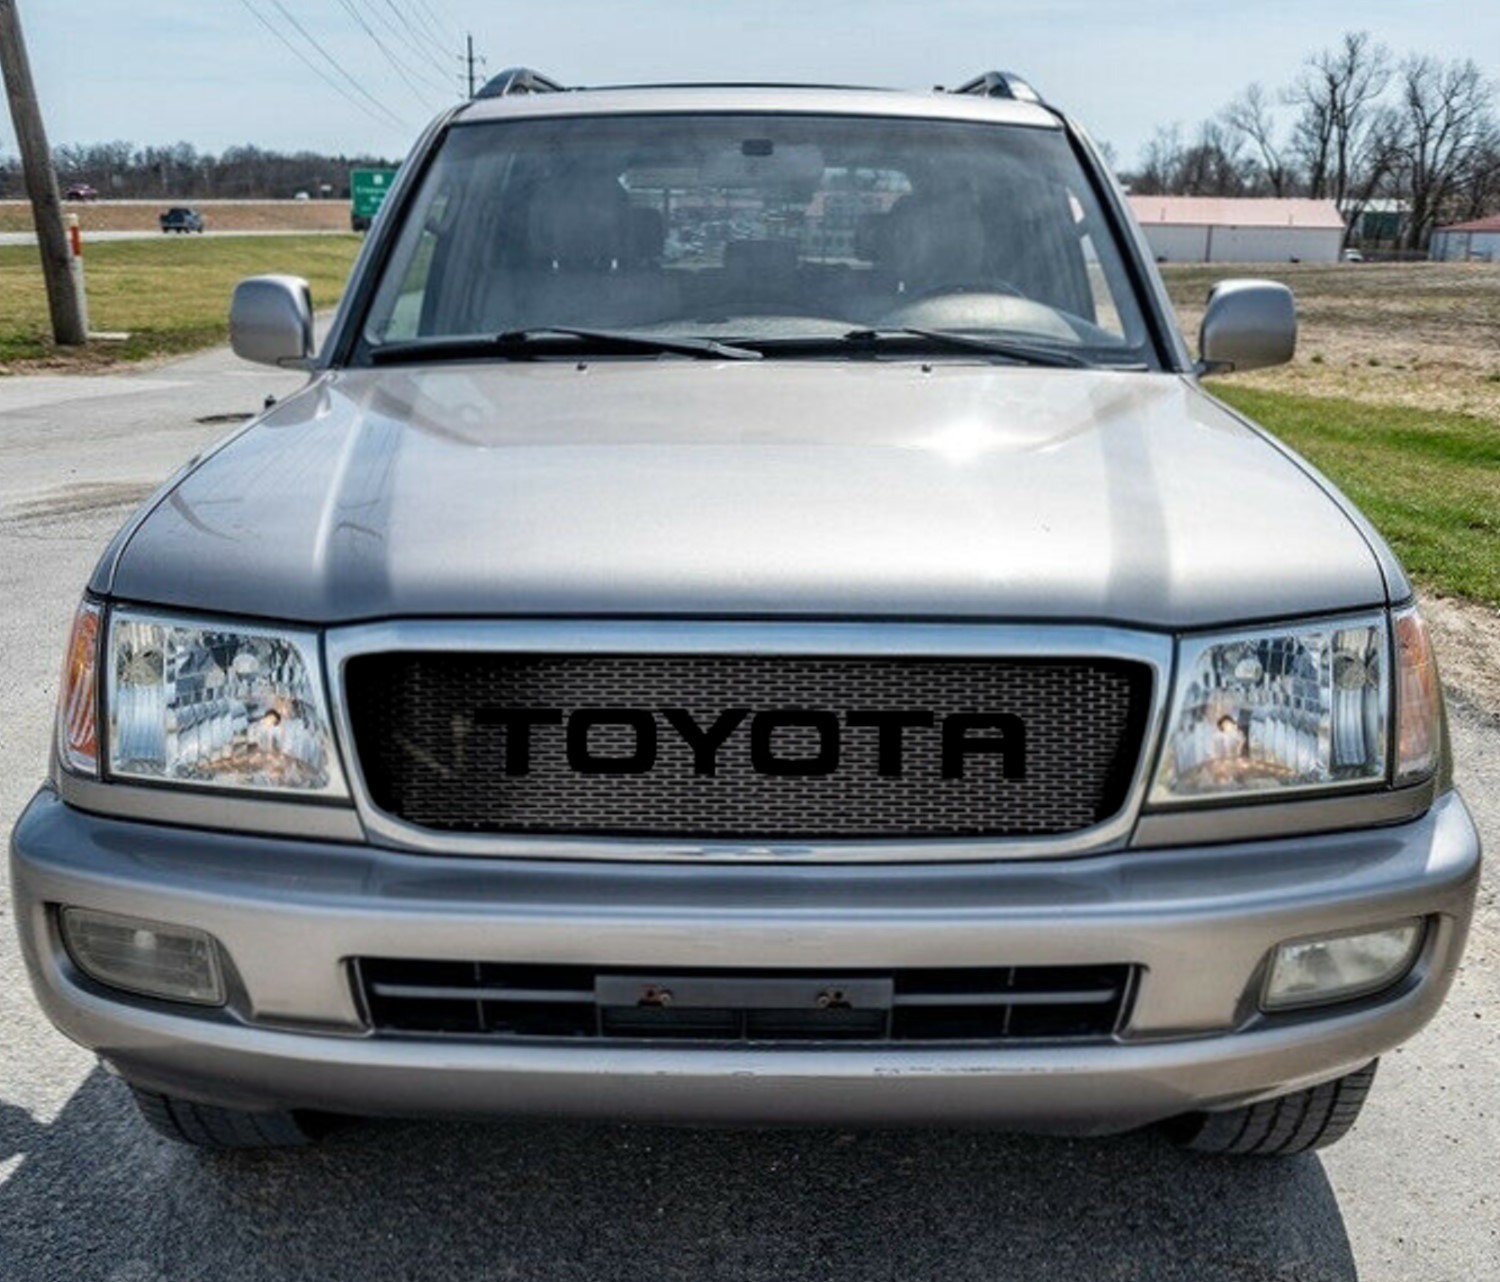 Upgrade Your Style: New Grille Mesh Product for 2003-05 Toyota Land Cruiser